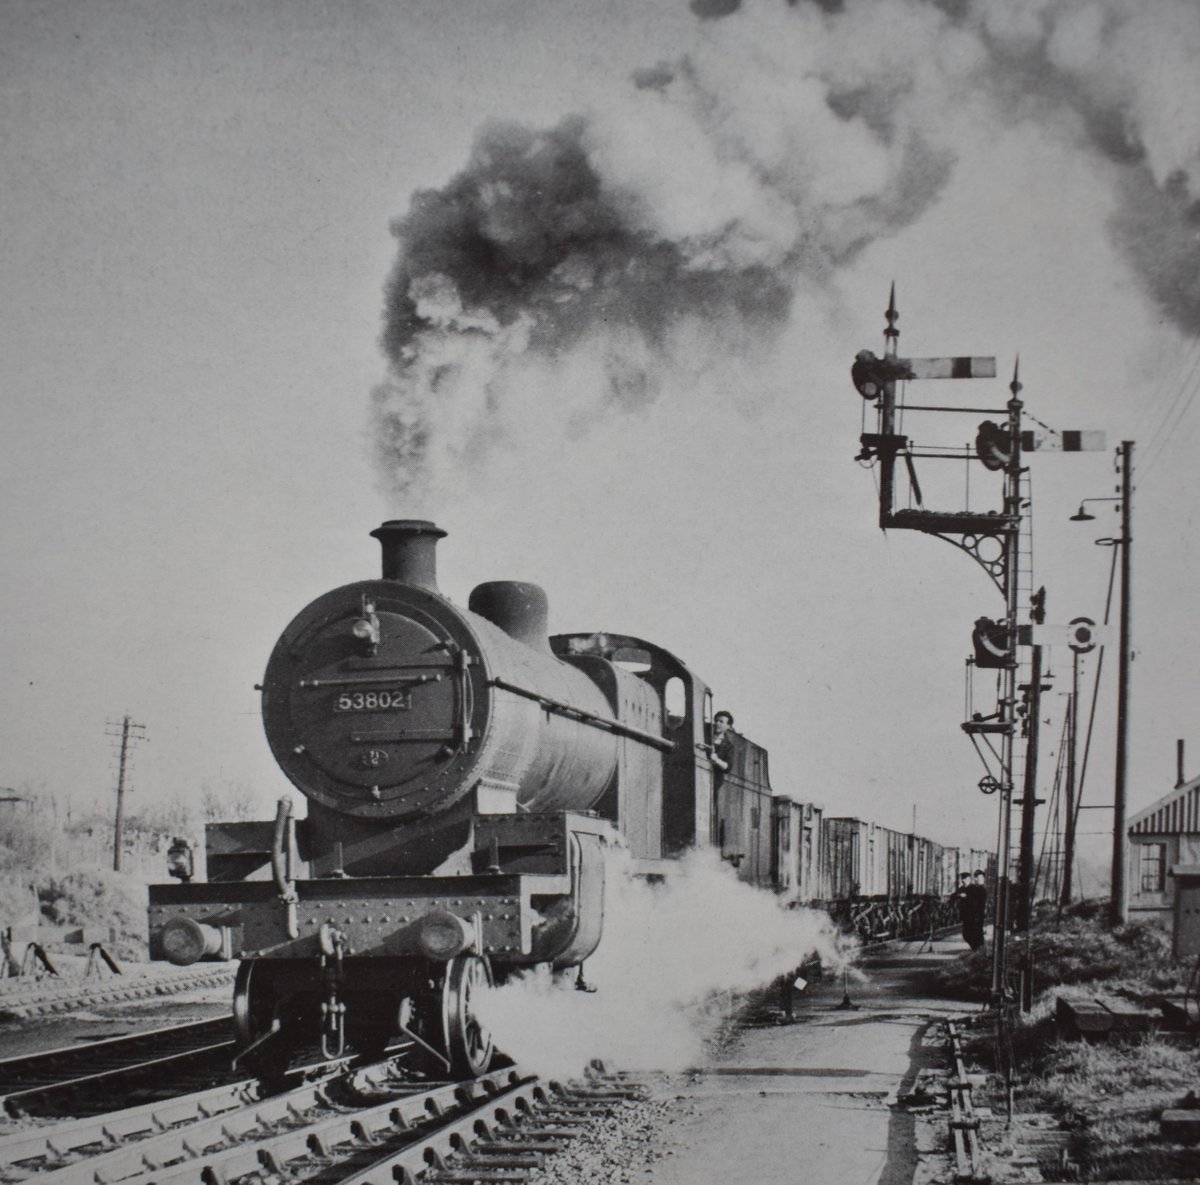 7F 53802 departing from Evercreech Junction Up yard with the 6.40pm (SO) goods to #Bath 
Date: 16th April 1955
📷 Photo by Ivo Peters.
#steamlocomotive #1950s #goodstrain #BritishRailways #SOMERSET #DORSET